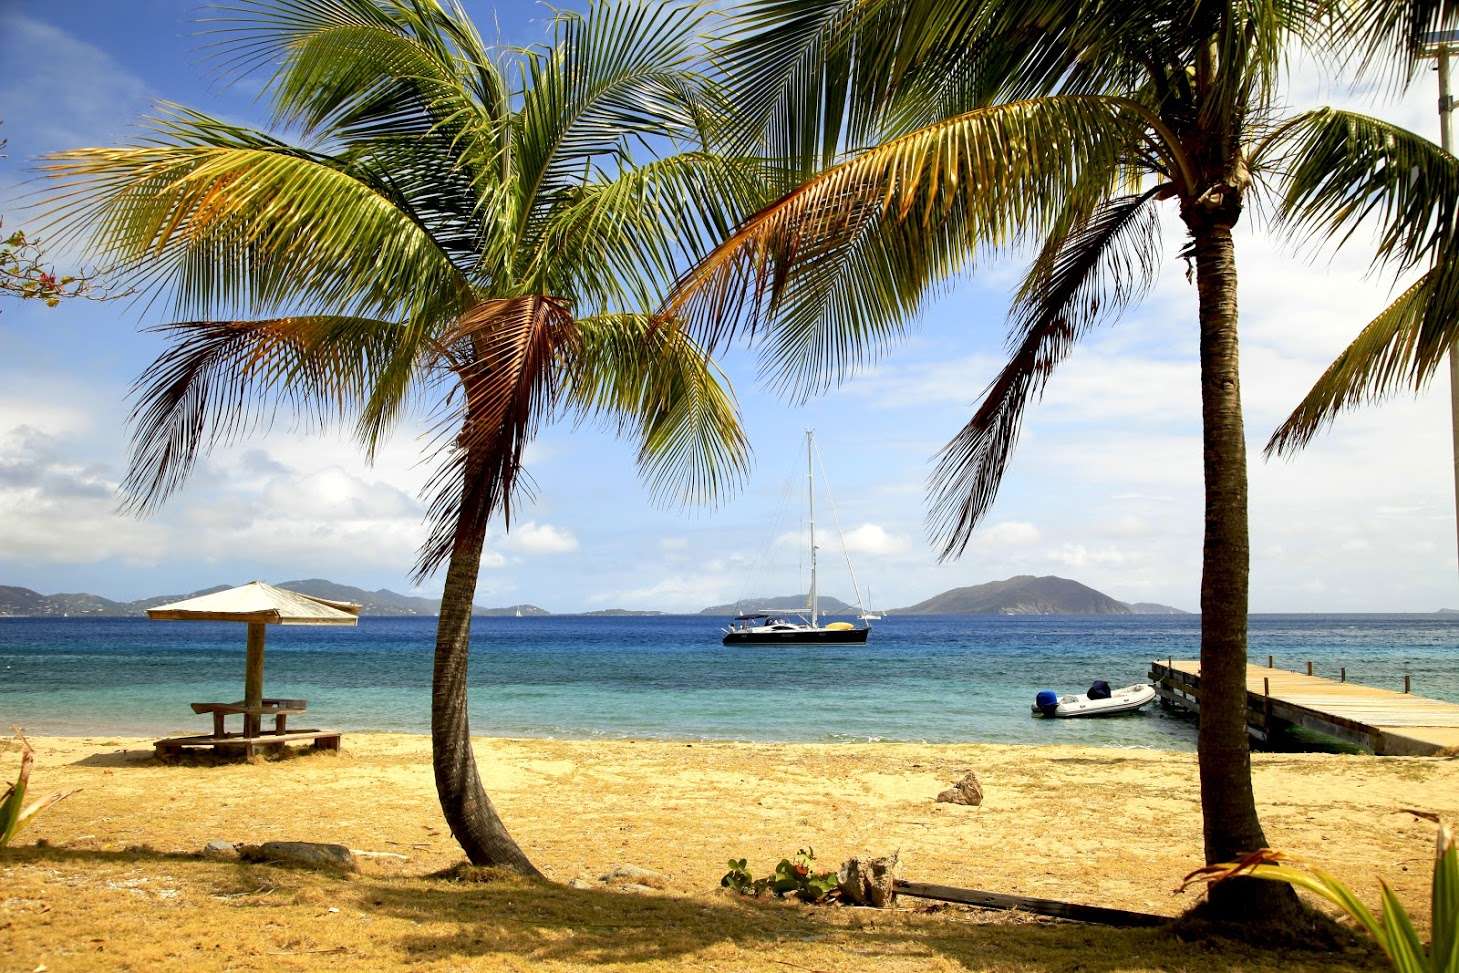 Sayang Crewed Yacht Charter Anchored off the Beach in the BVI